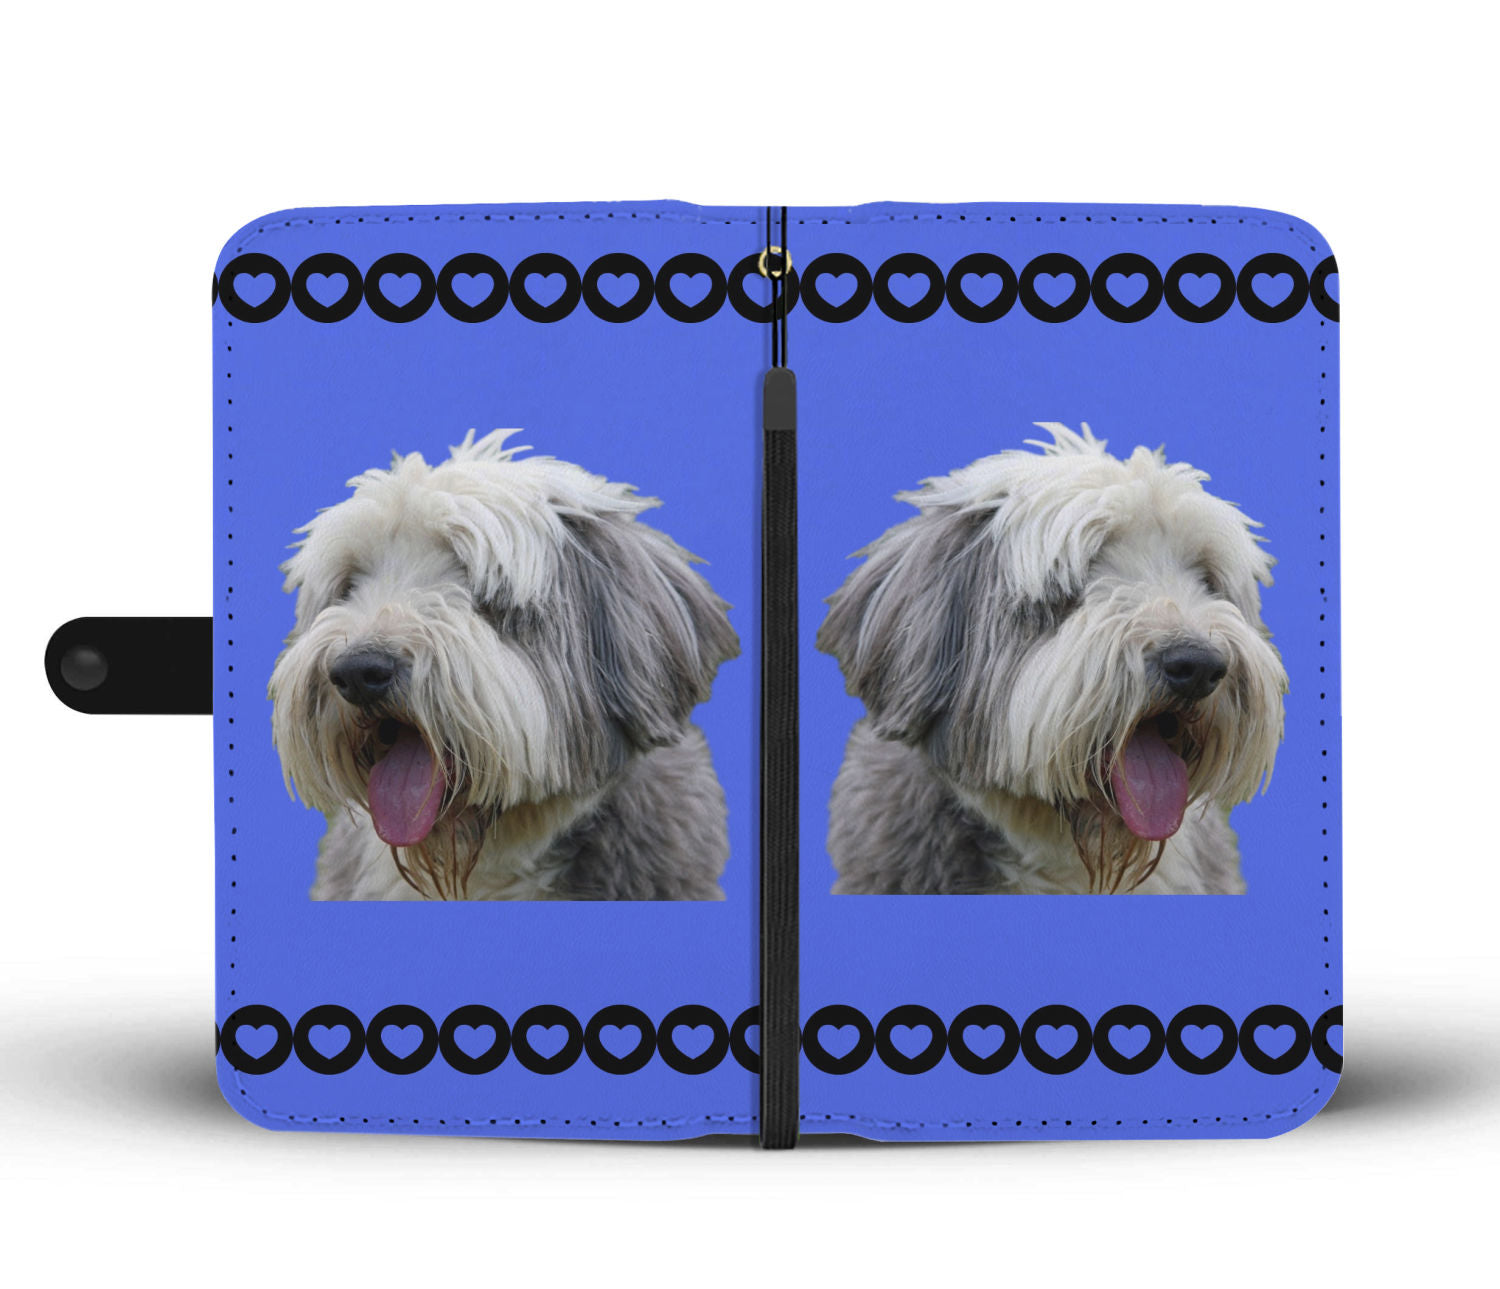 Bearded Collie Phone Case Wallet